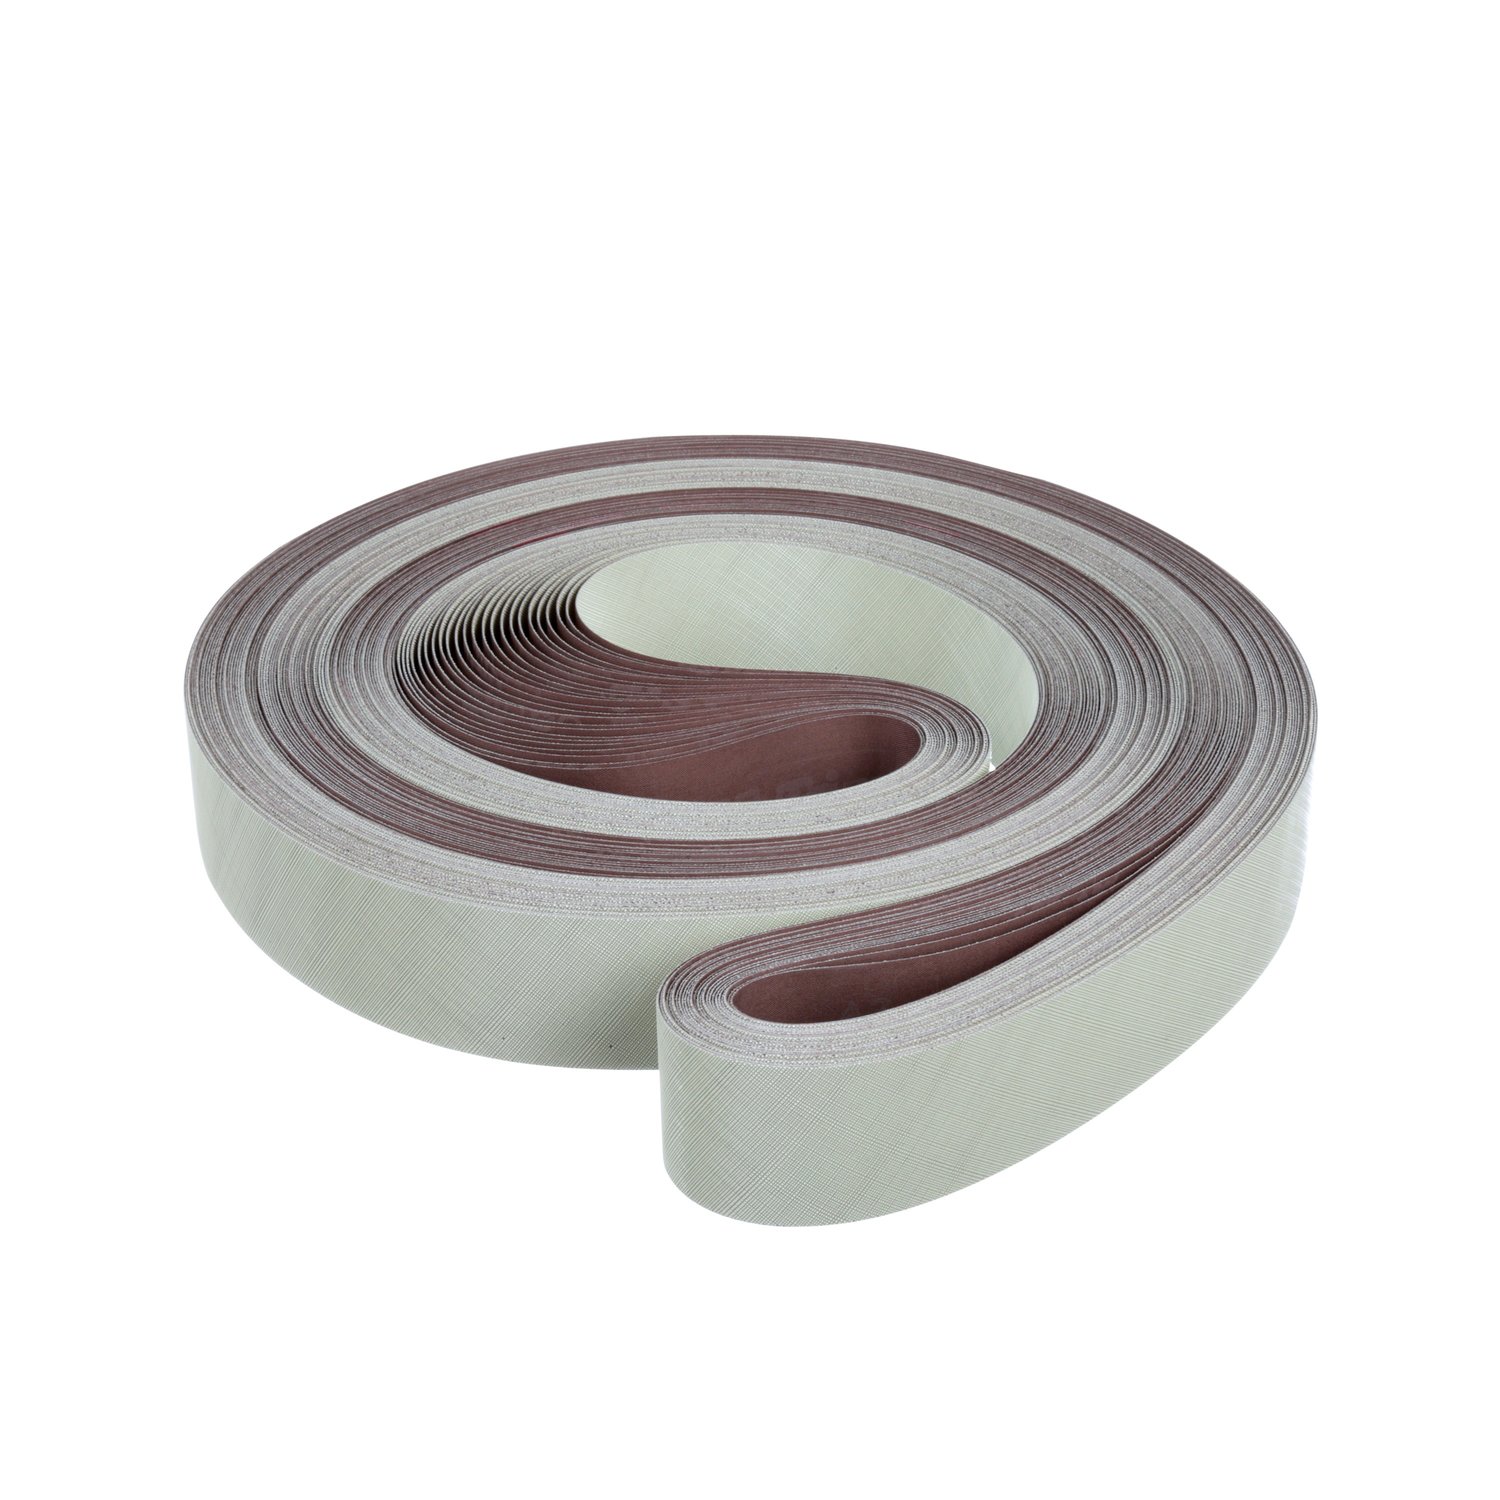 7100047194 - 3M Trizact Cloth Roll 305EA, A3 JE-weight, Config